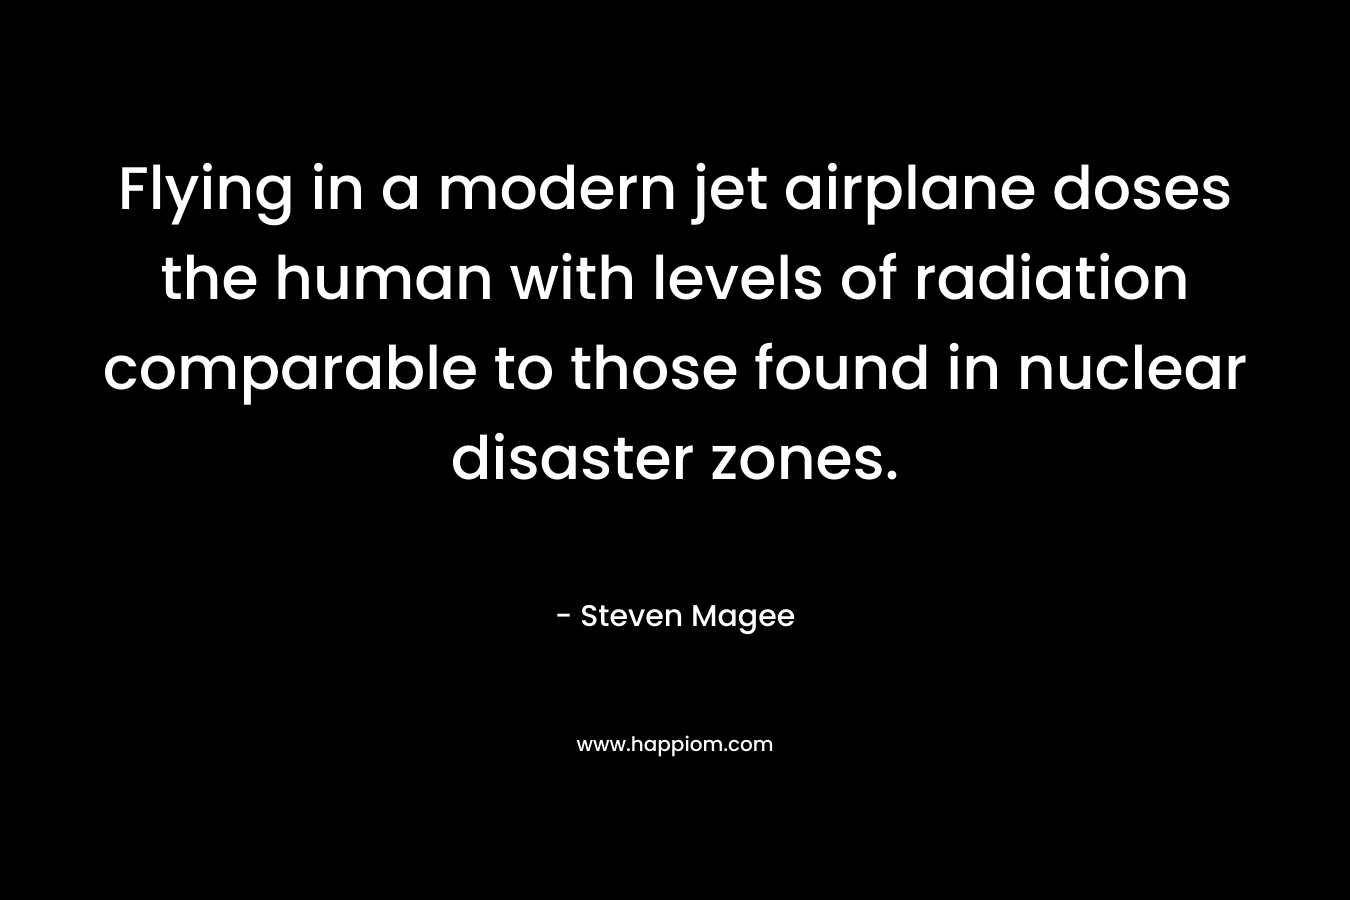 Flying in a modern jet airplane doses the human with levels of radiation comparable to those found in nuclear disaster zones. – Steven Magee